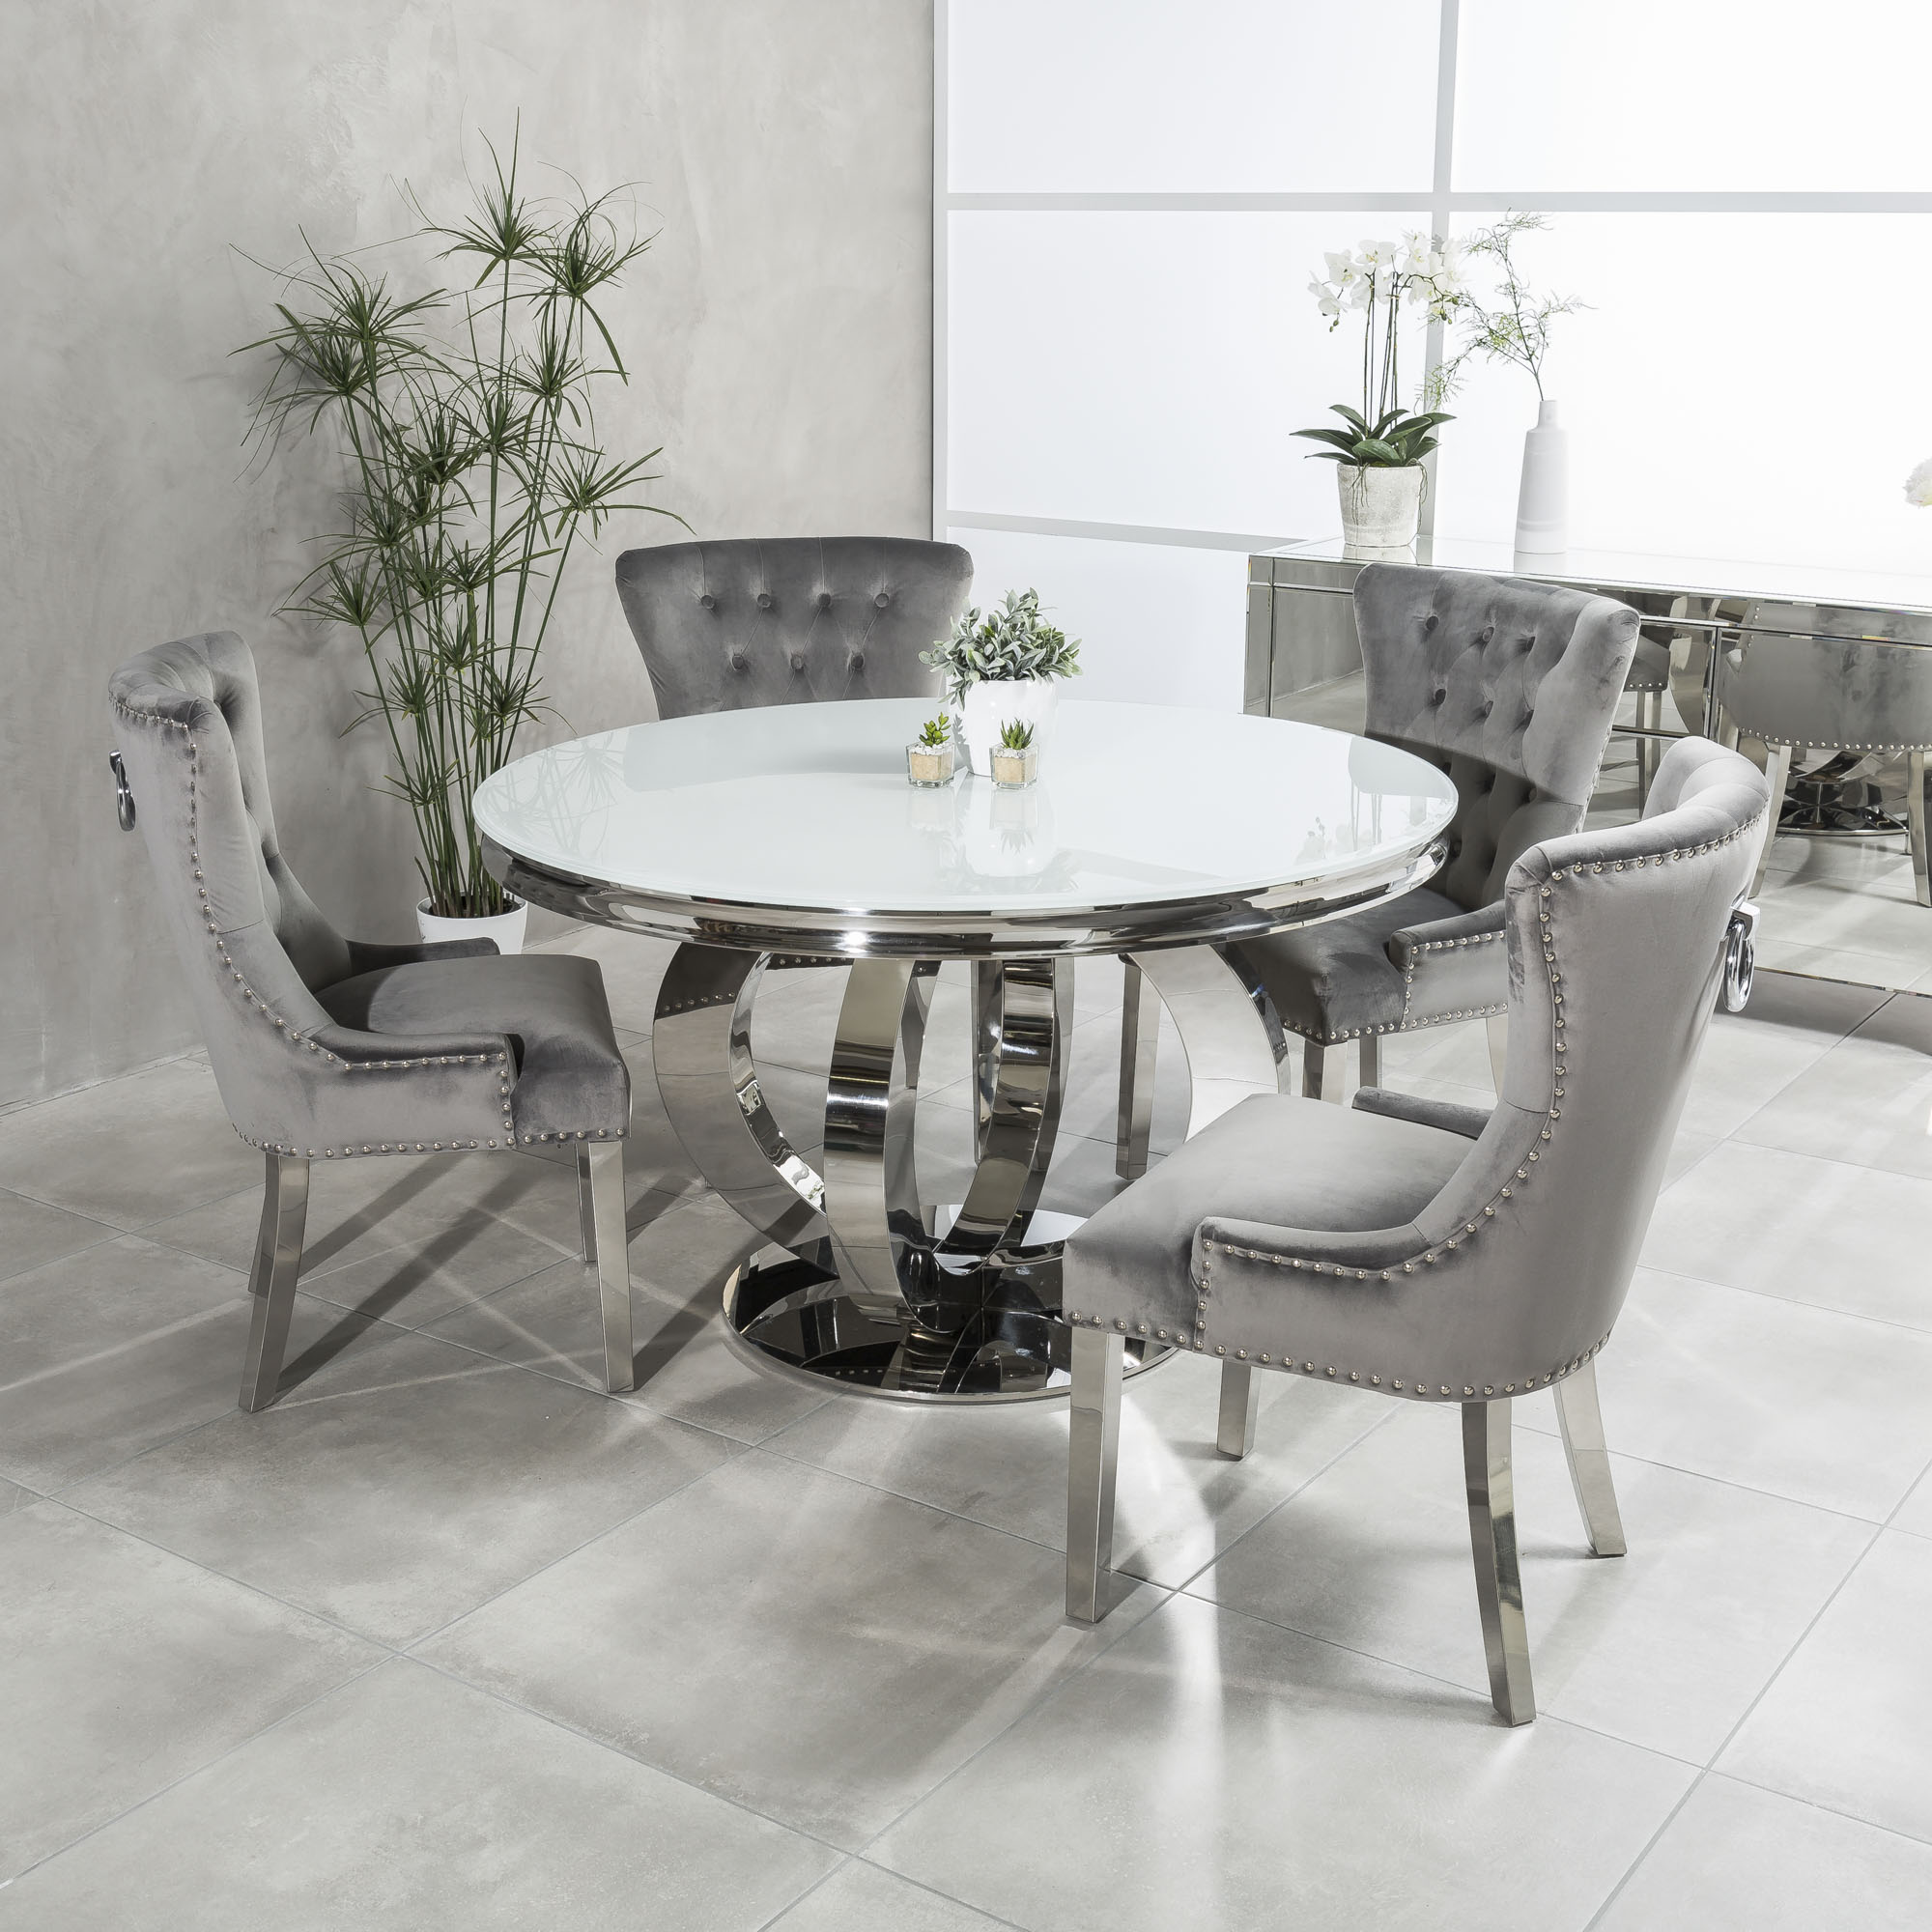 1.3m Circular Polished Steel Dining White Glass Table Set with 4 Wingback Grey Brushed Velvet Dining Chairs